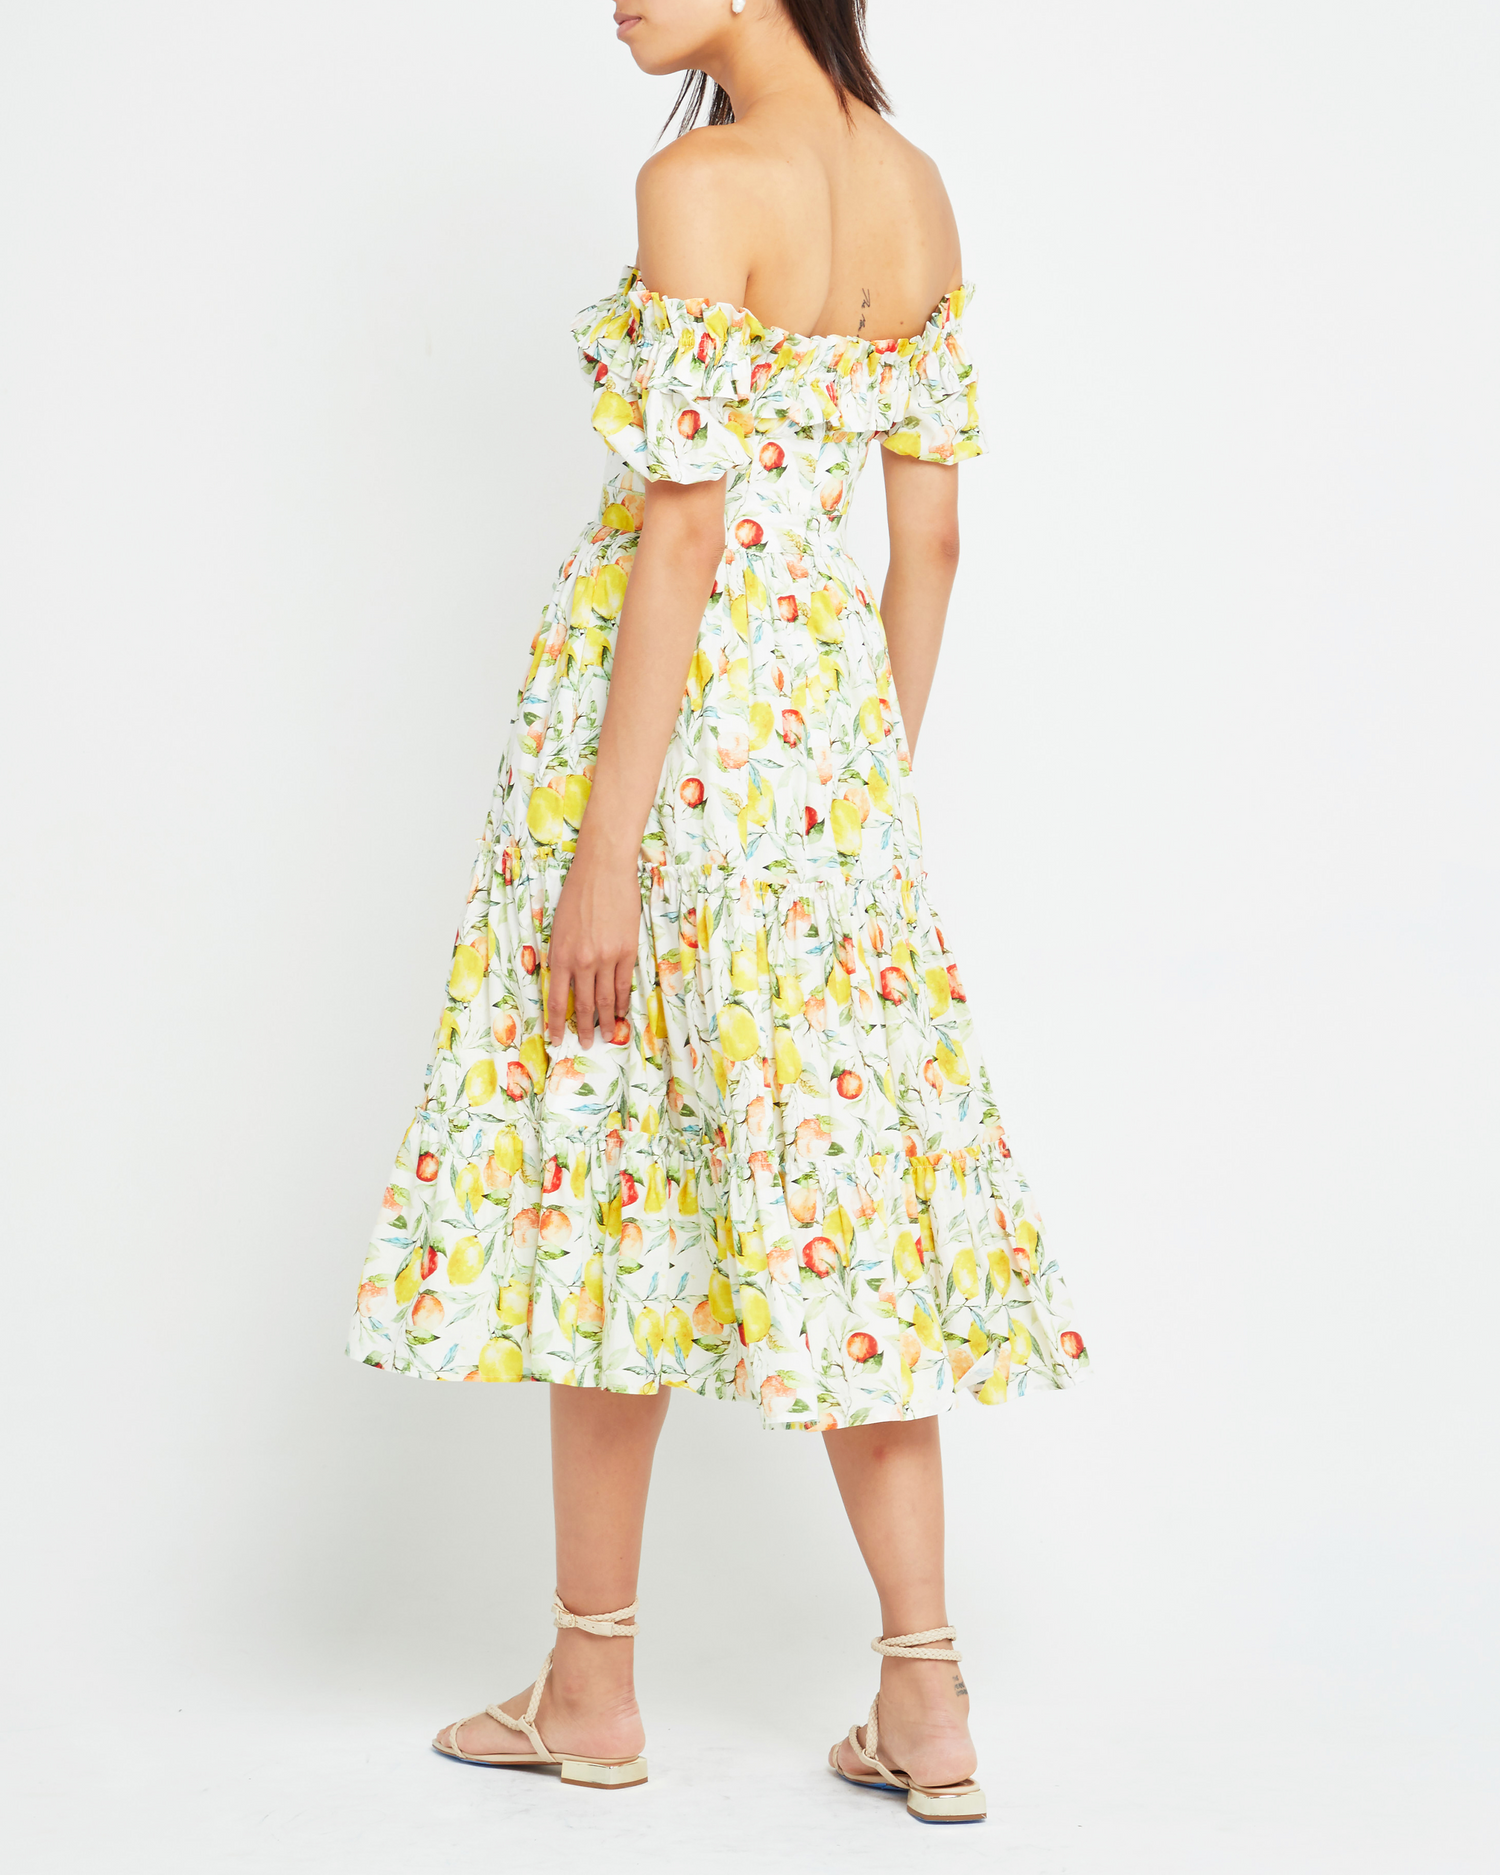 Second image of Allegra Dress, a midi dress, fruit print, off the shoulder, ruffle, puff sleeve